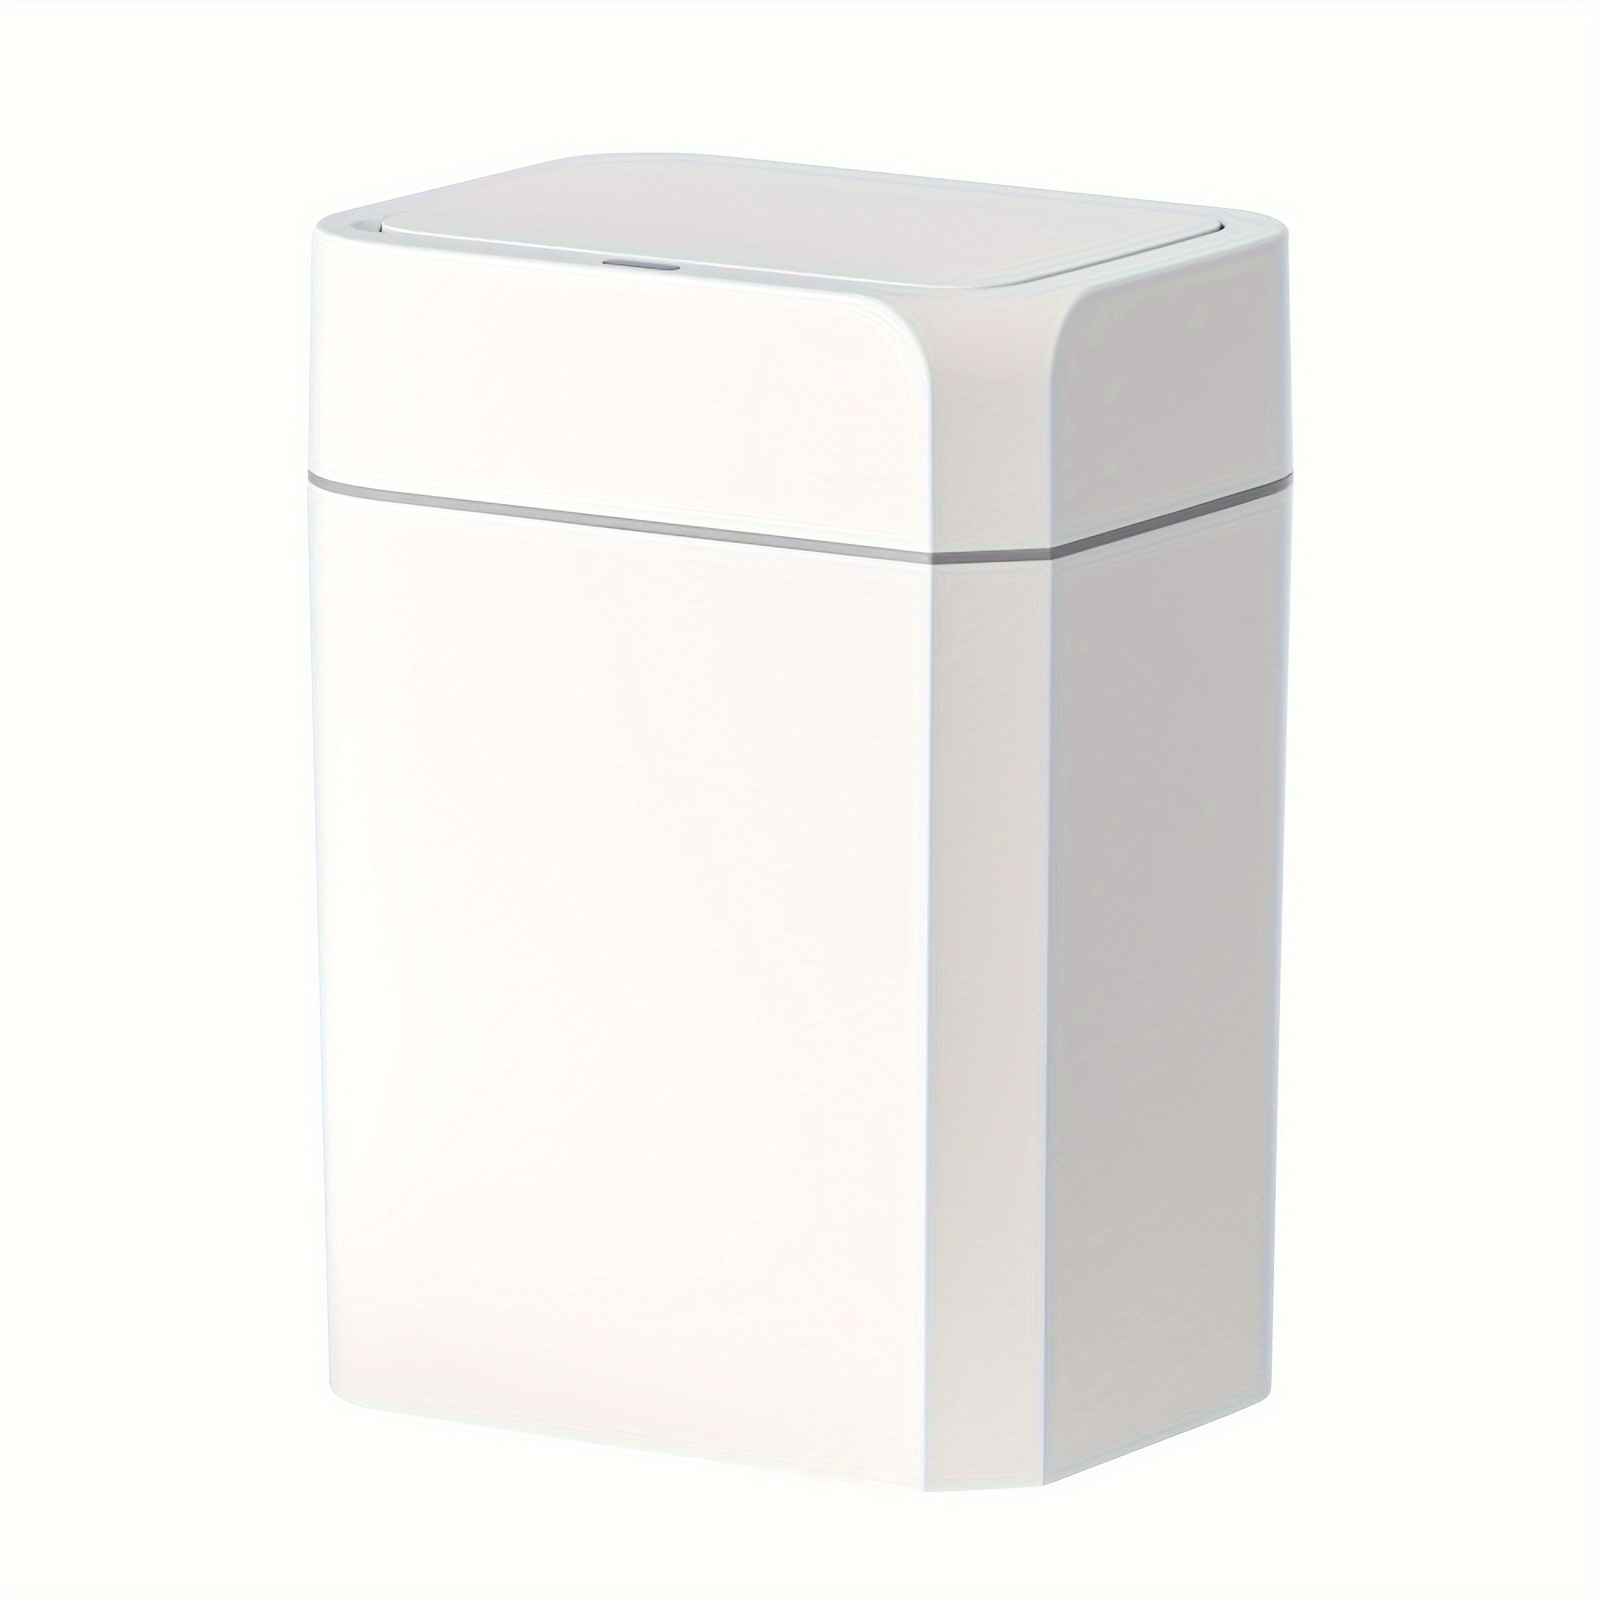 

Elpheco Motion Sensor Trash Can With Lid Automatic Small Slim Garbage Can Smart Trash Bin For Bathroom, Kitchen, Office, Bedroom, Living Room, Toilet